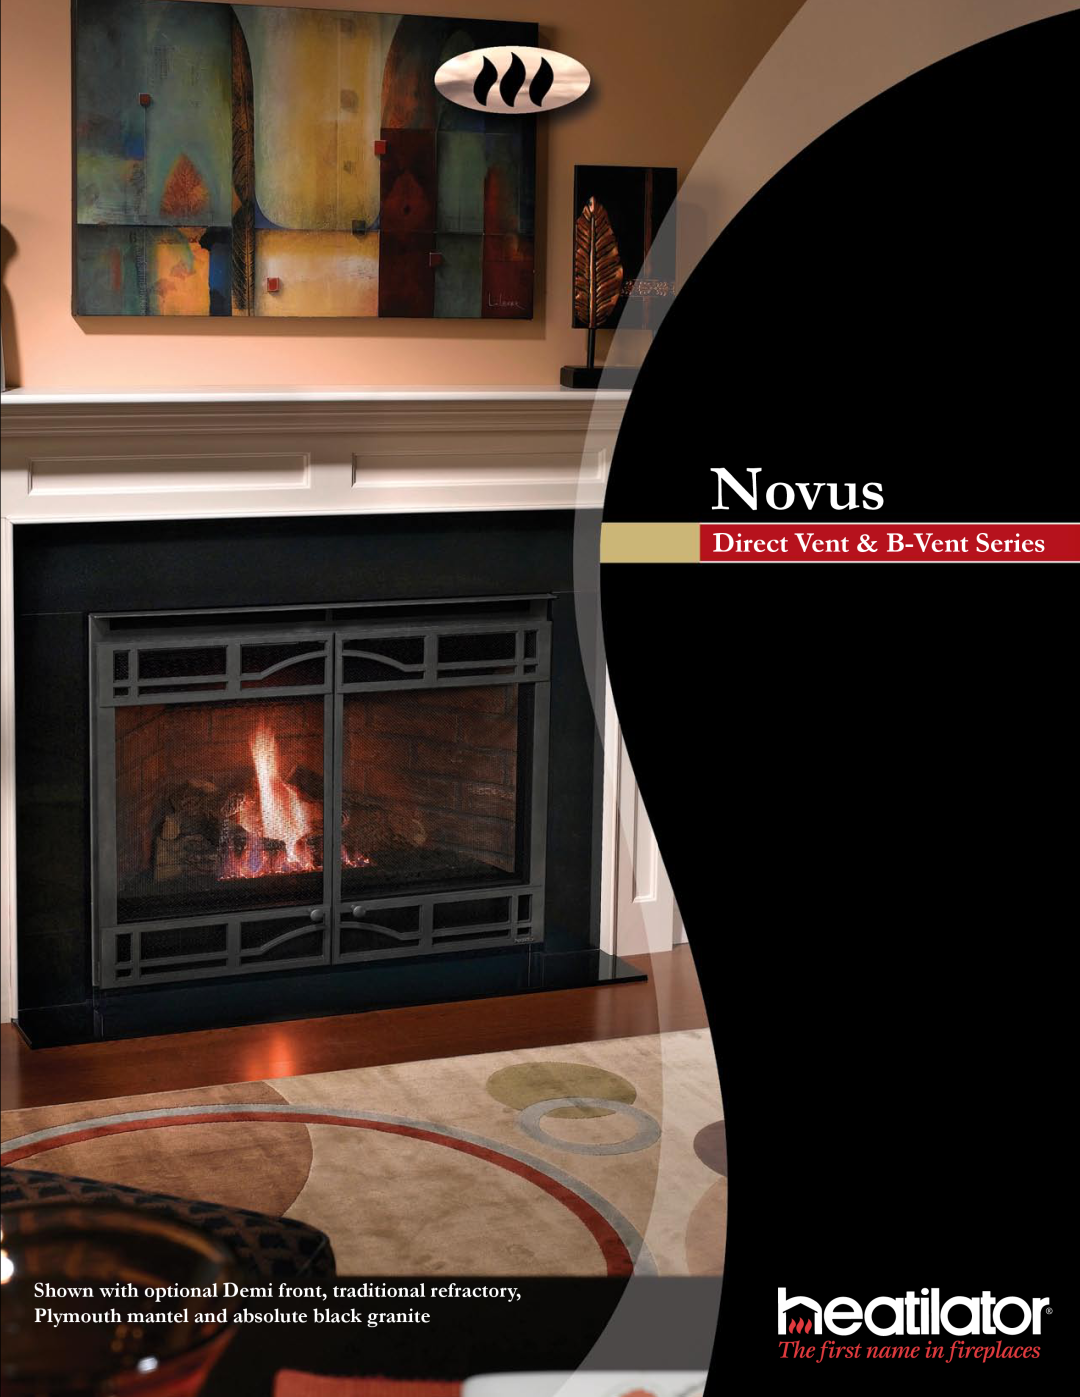 Hearth and Home Technologies Novus manual Direct Vent & B-Vent Series, Plymouth mantel and absolute black granite 